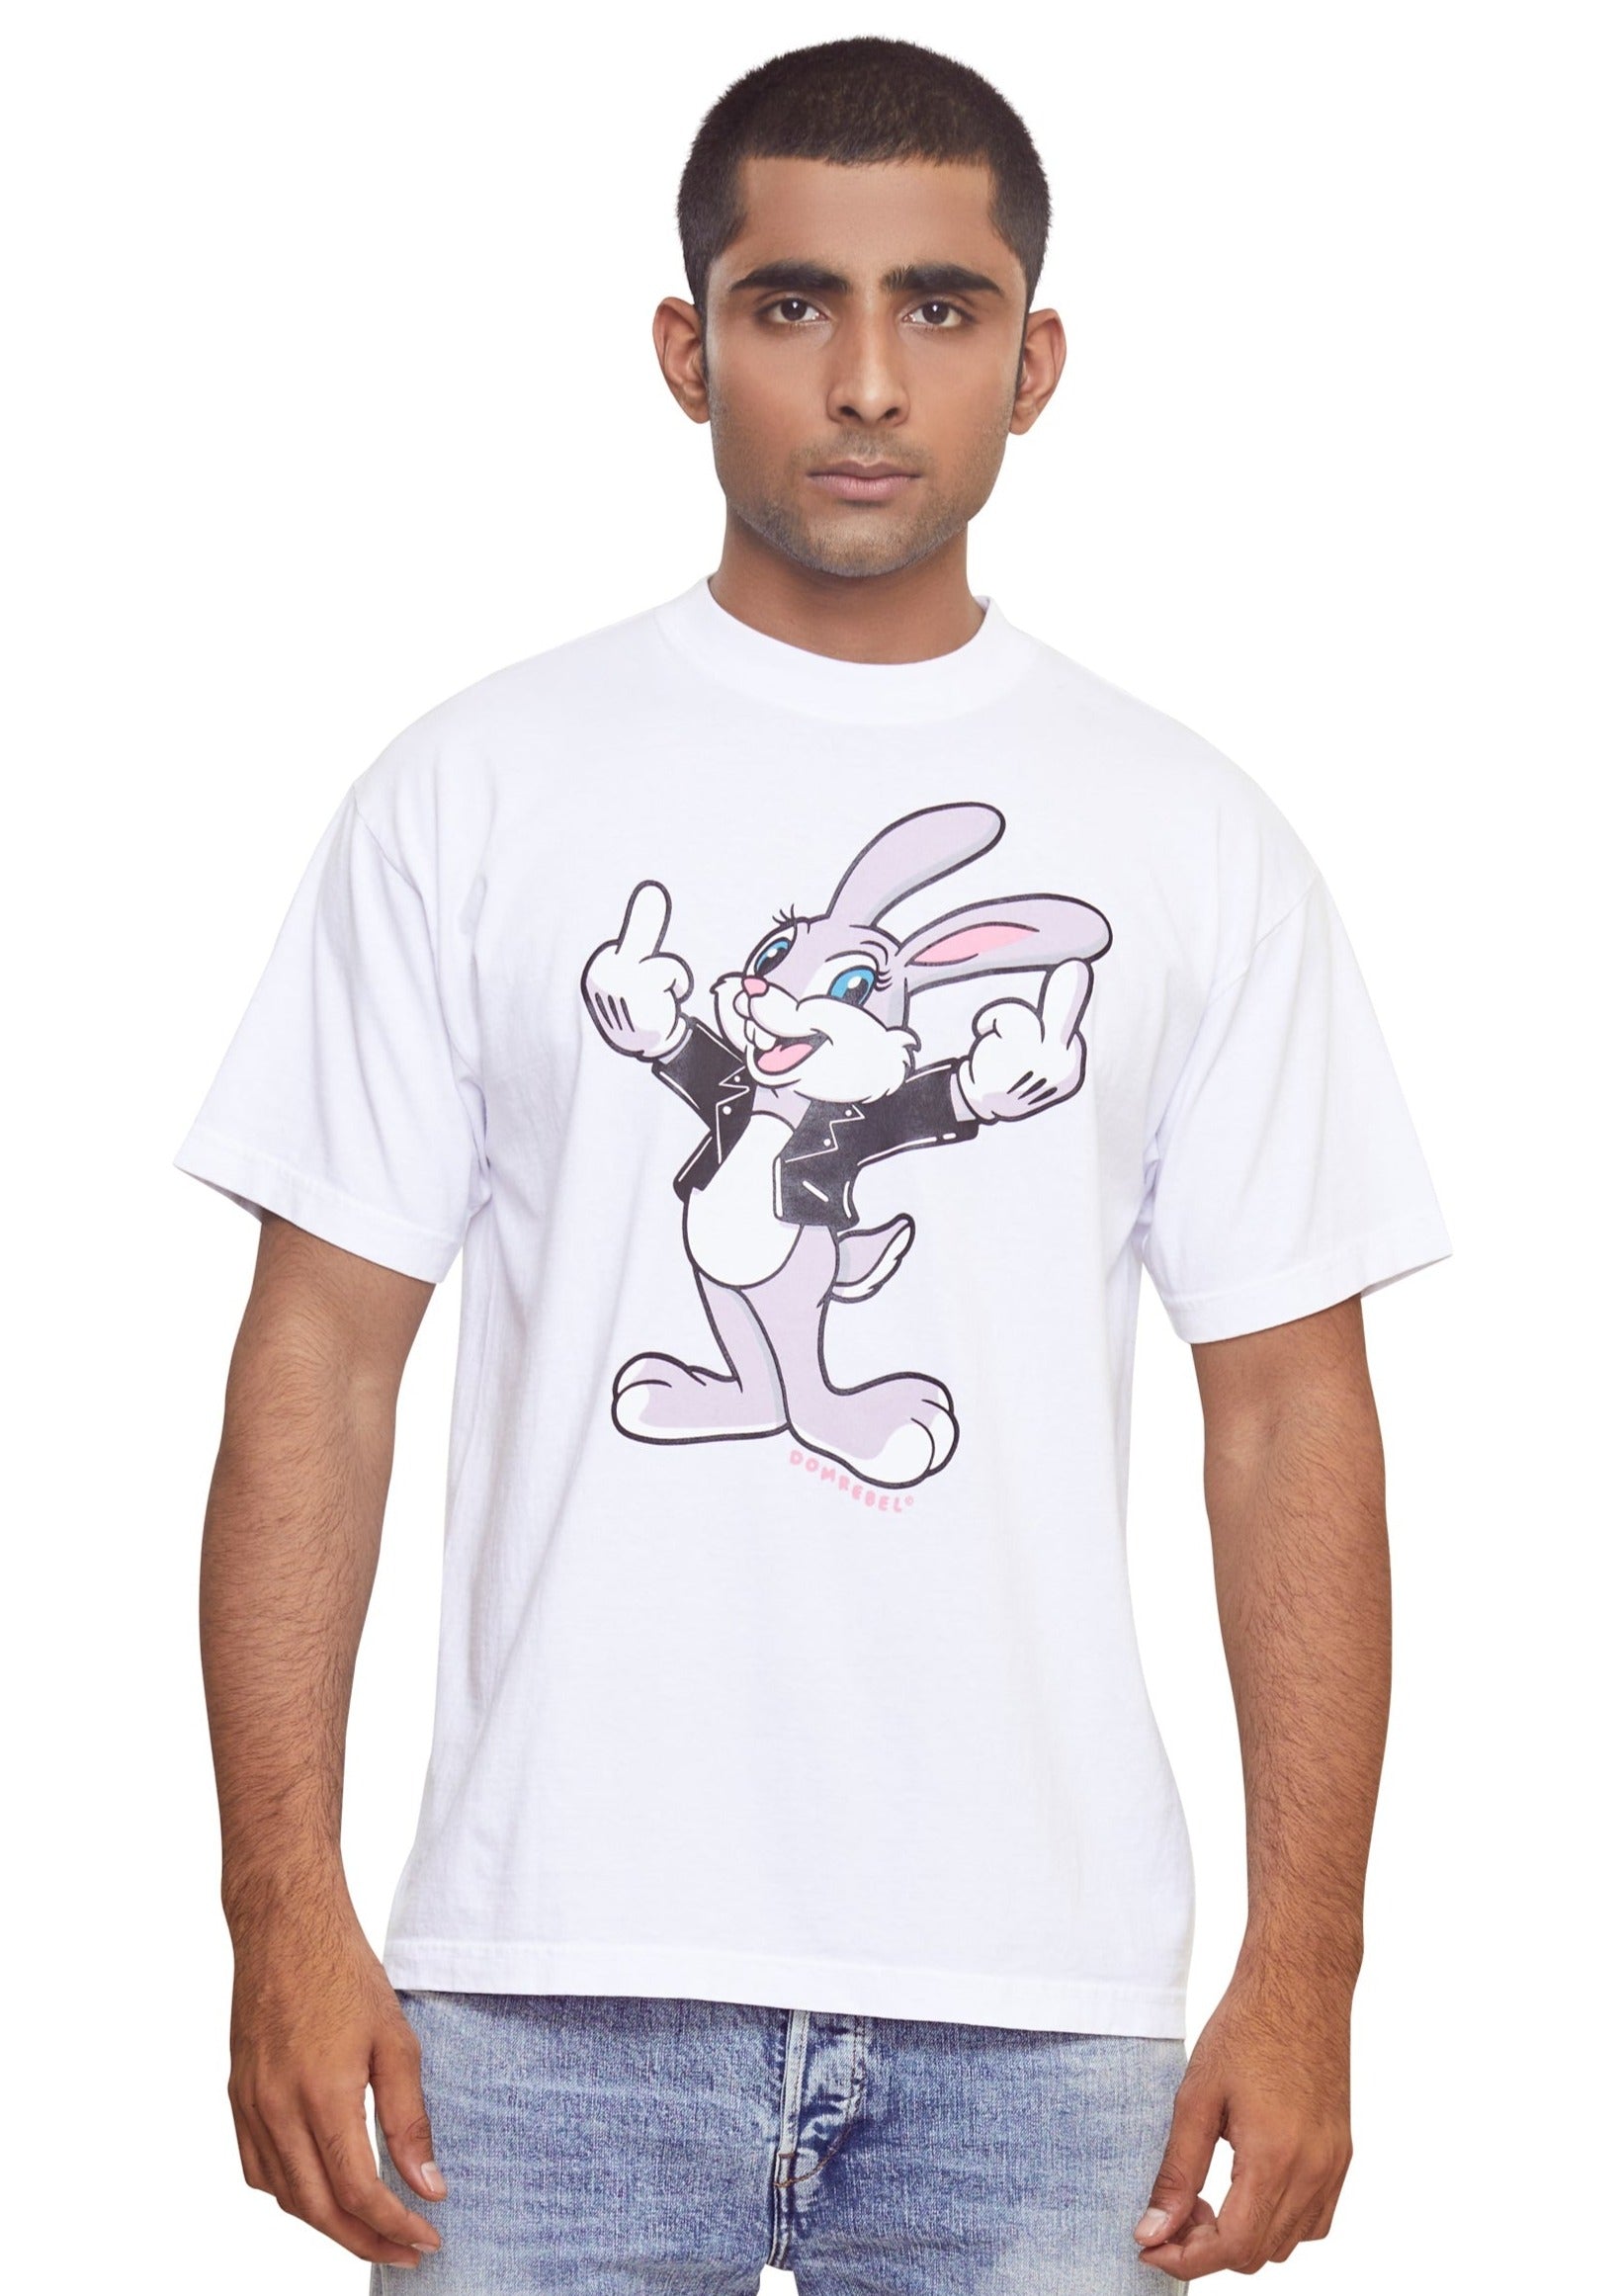 White Rabbit graphic-print distressed cotton T-shirt from the brand Domrebel